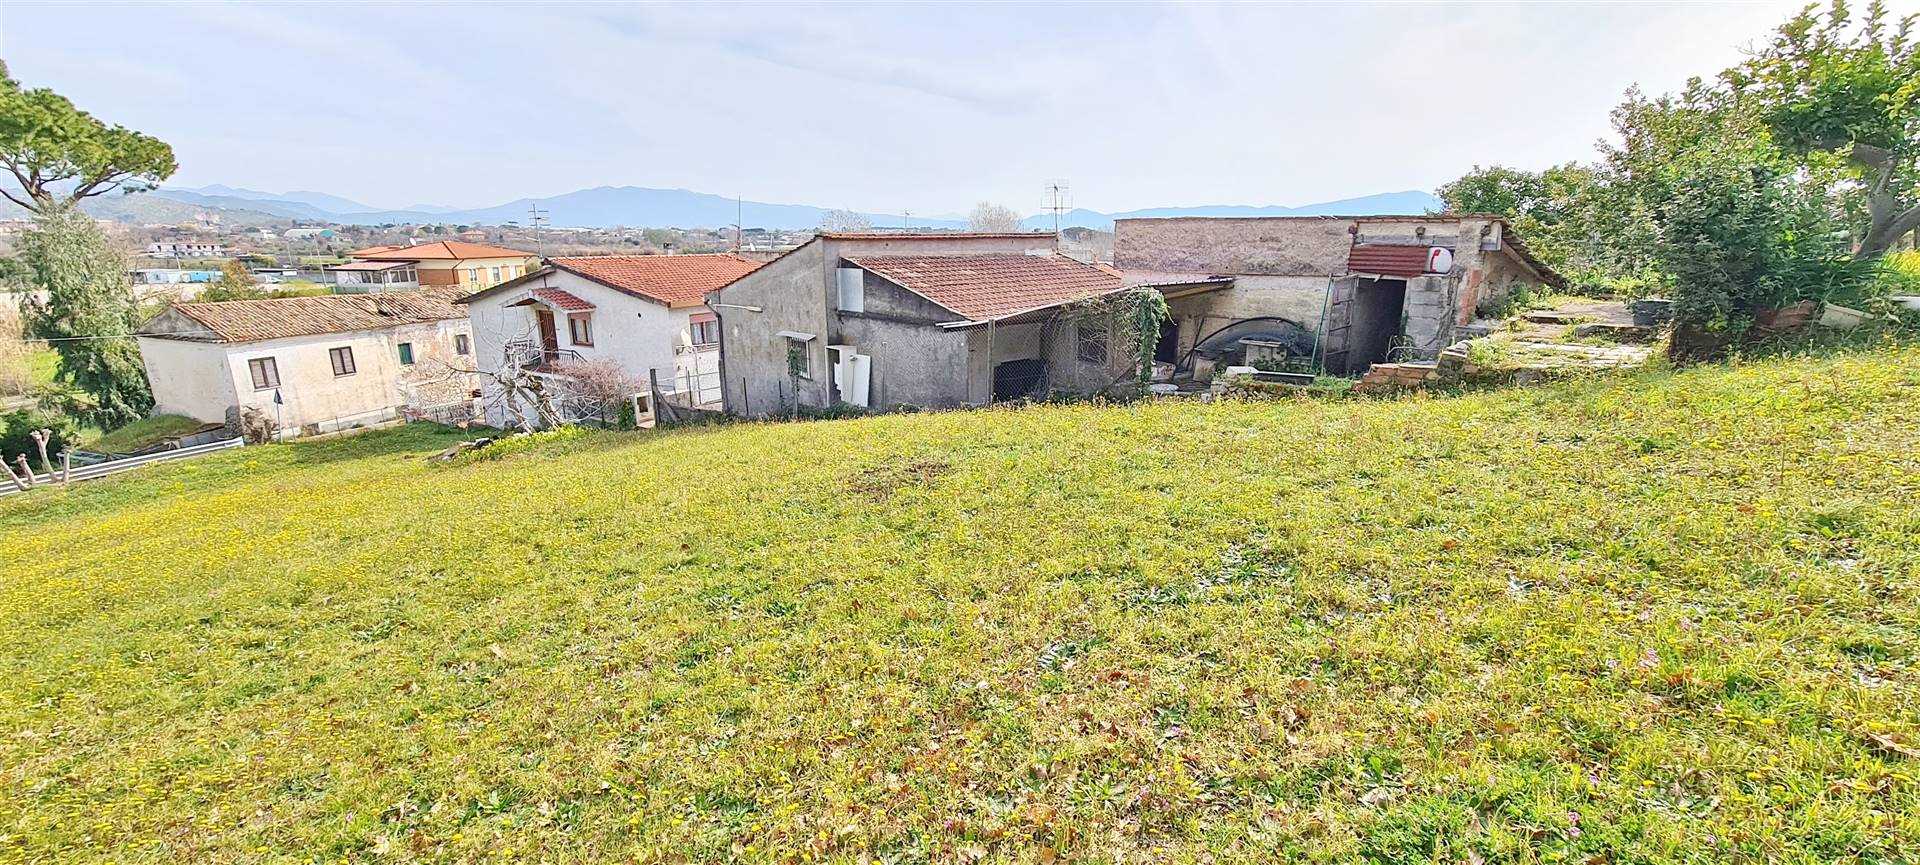 MINTURNO, Detached house for sale of 90 Sq. mt., Habitable, Heating Individual heating system, Energetic class: G, placed at Ground, composed by: 4 